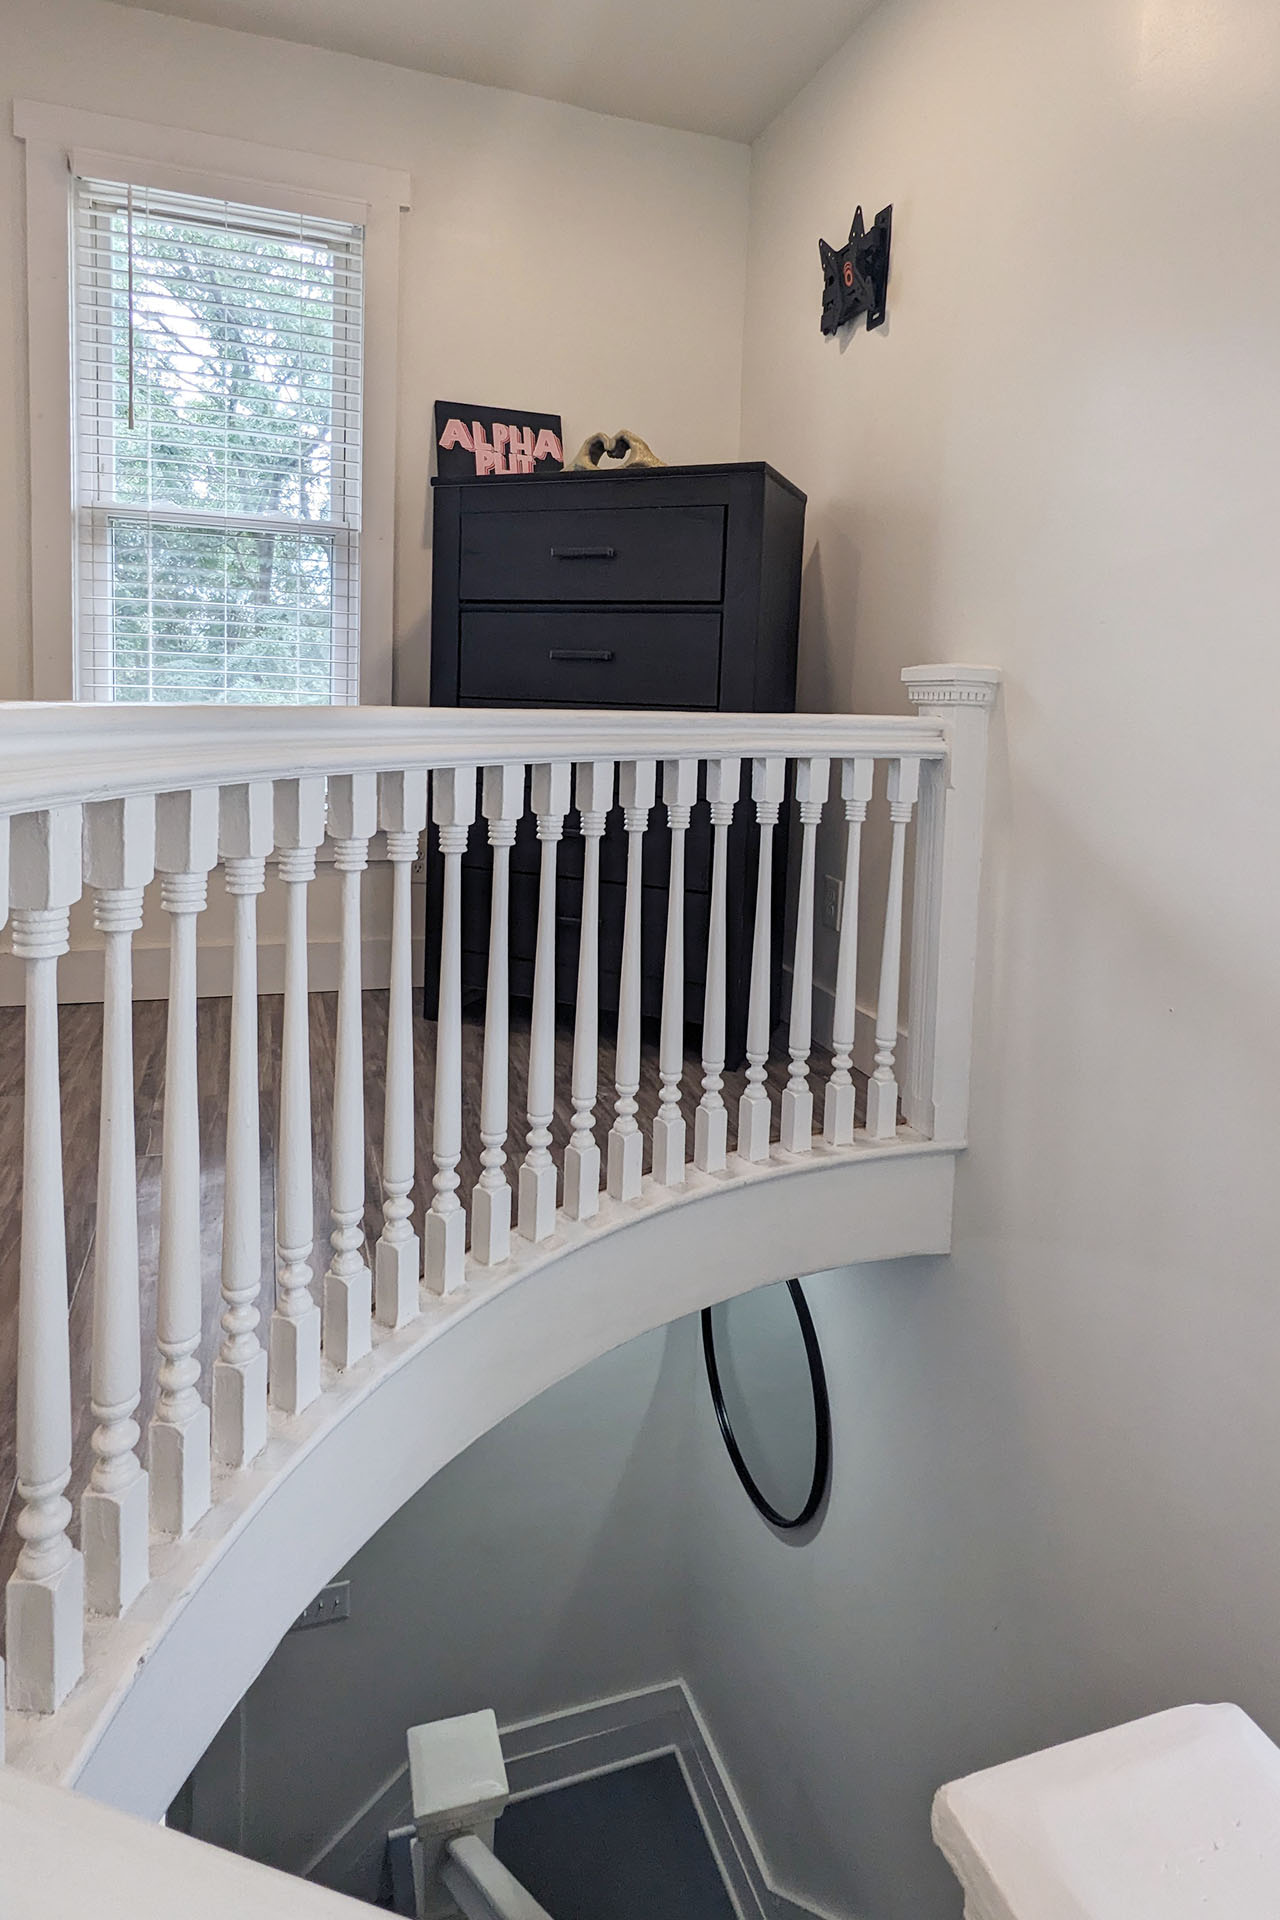 Upstairs landing/study area, detail of banister at 39 Frank St.